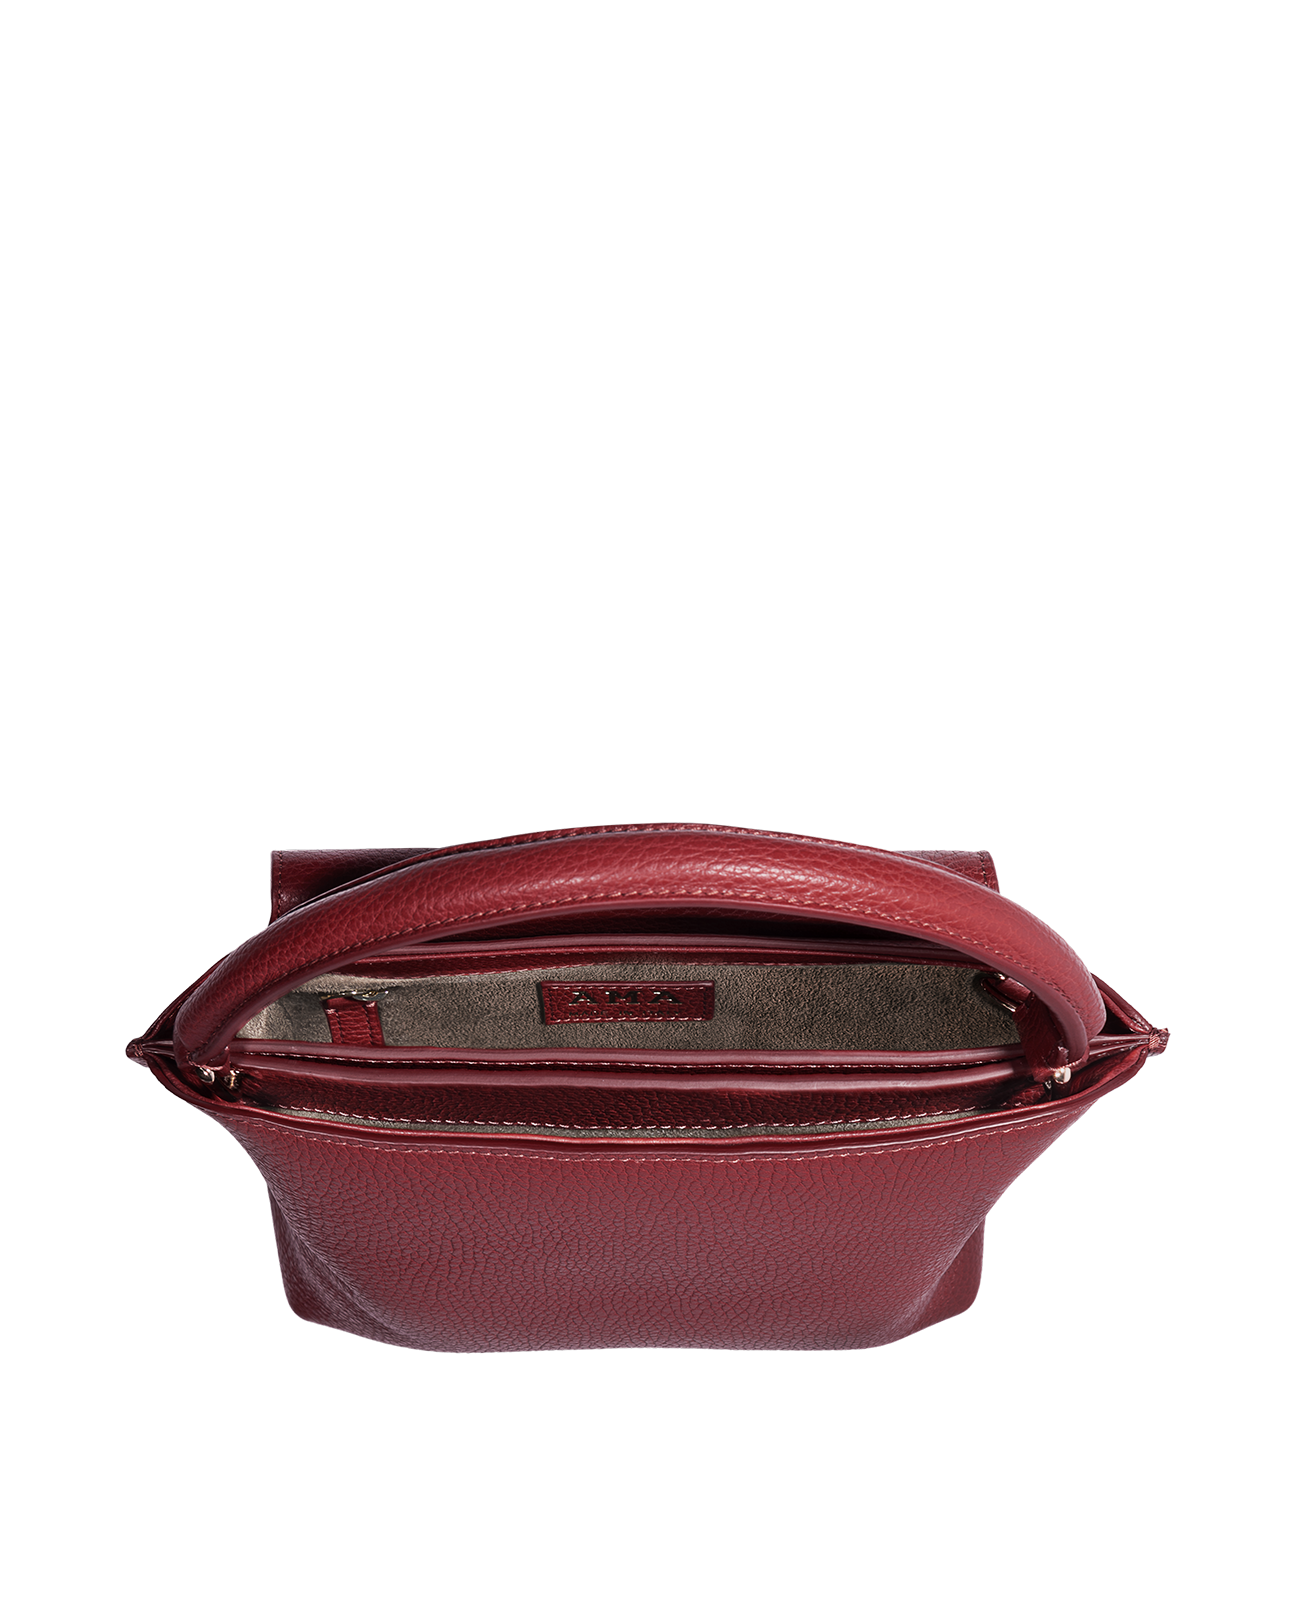 AMA Bags: Cross-body bag in Italian full-grain leather, semi-aniline calf Italian leather with detachable shoulder strap.Three compartments, zip pocket in the back compartment. Magnetic flap closure with logo. Color: Dark Red. Size:Large